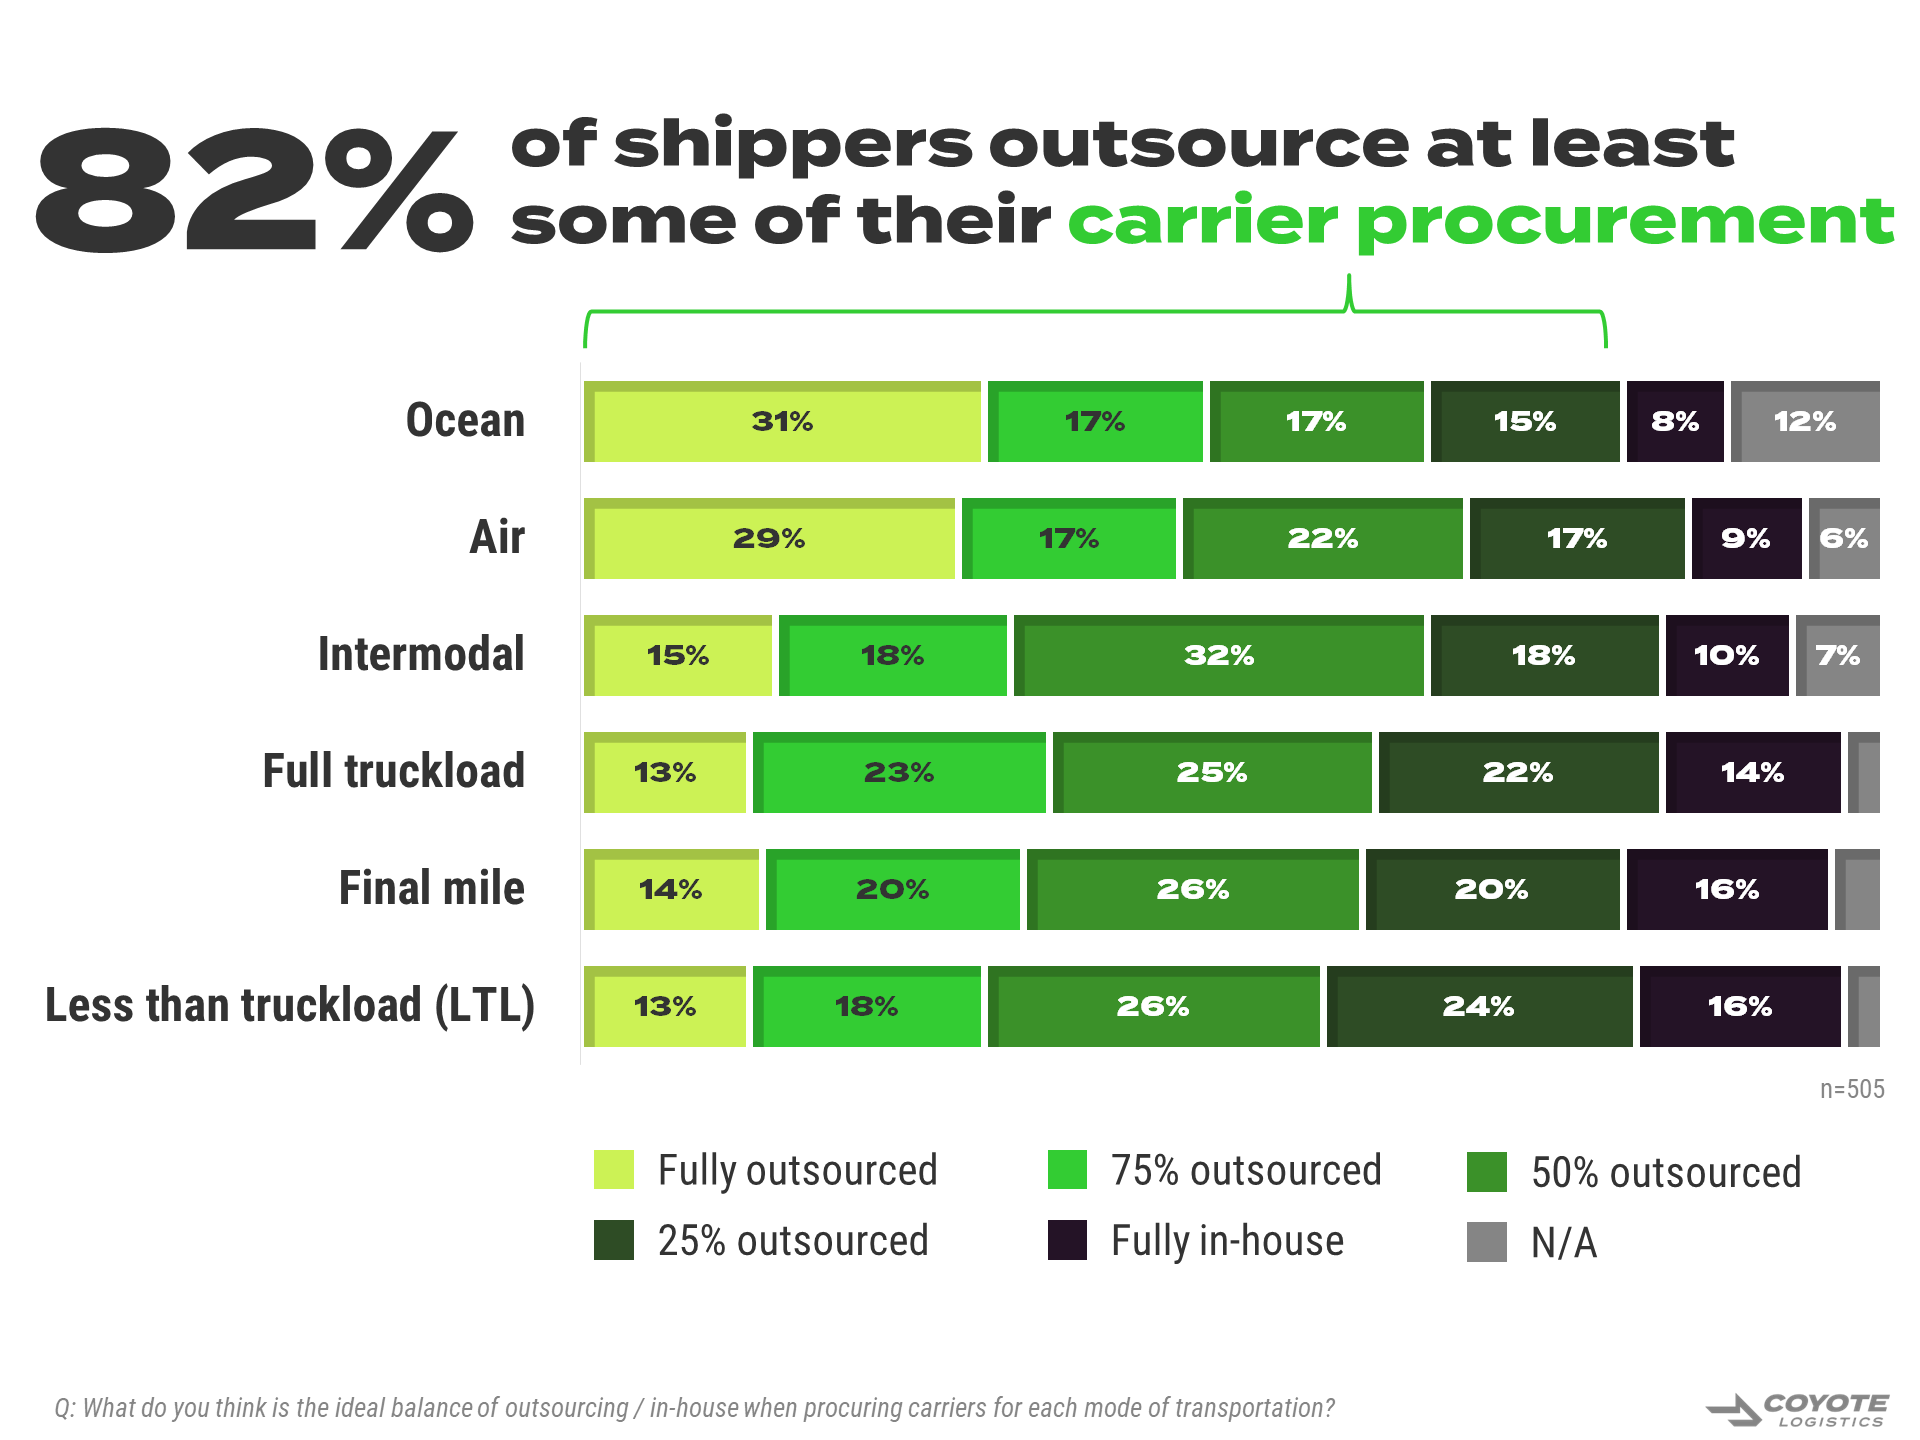 80% of shippers outsource at least some of their carrier procurement